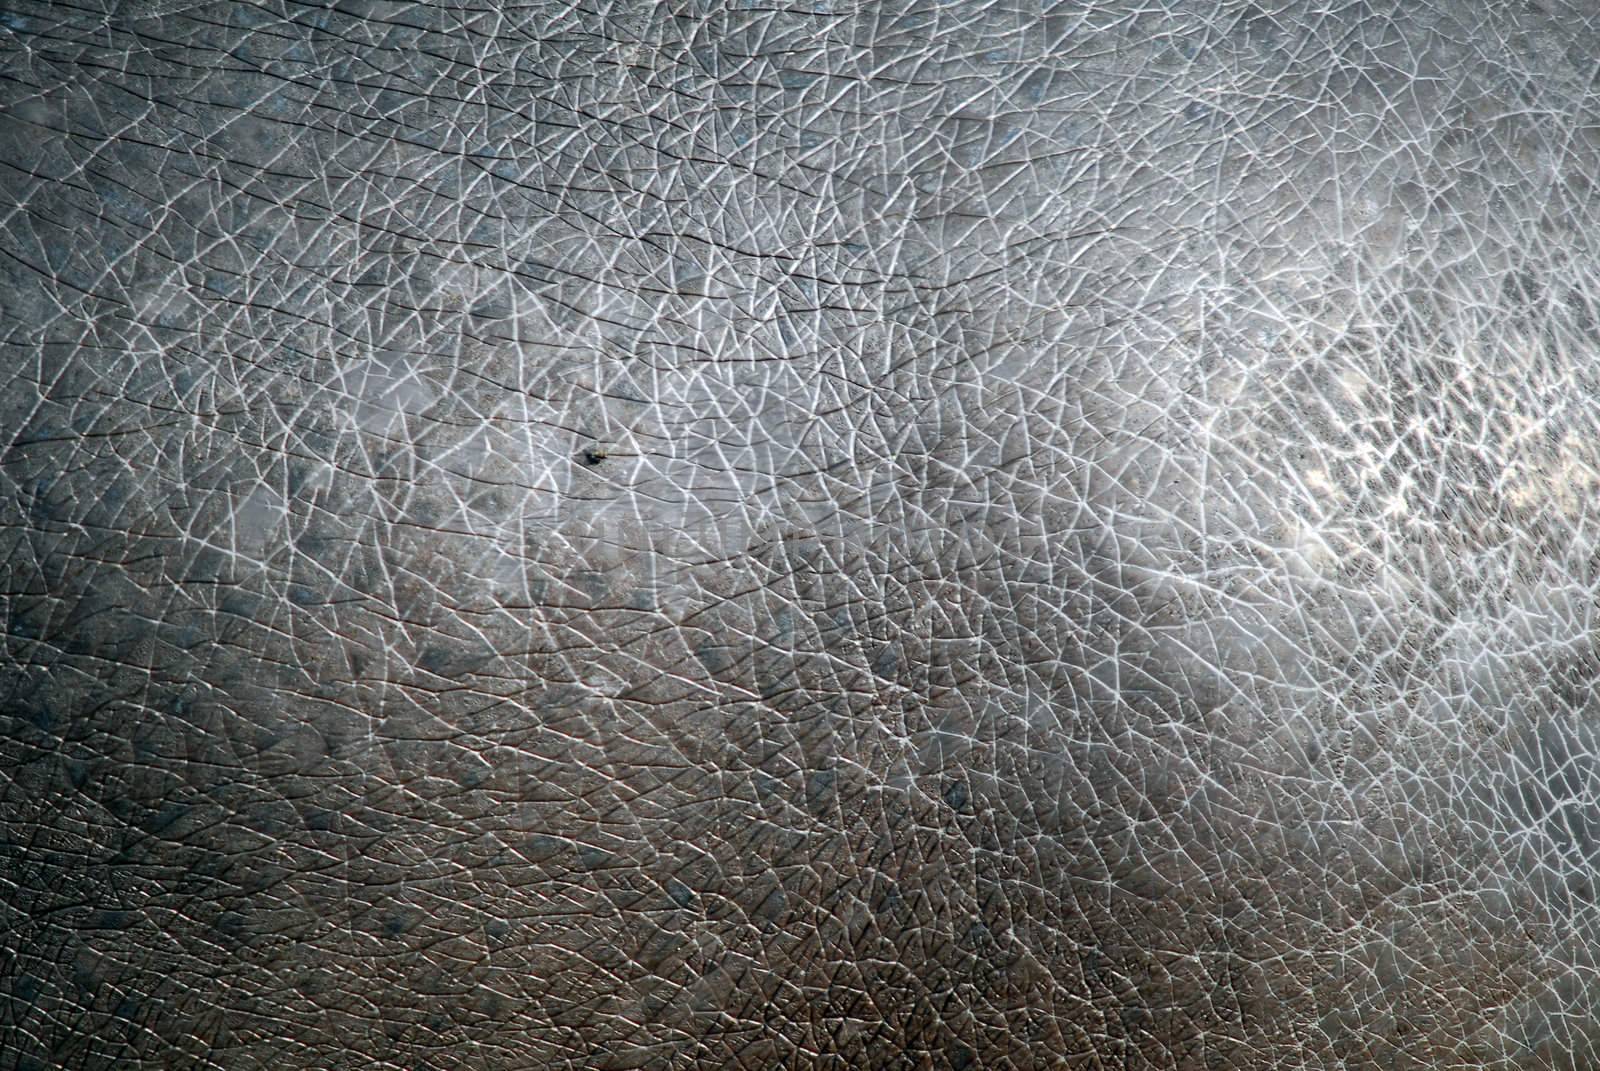 Close-up picture of the skin of an hippopotamus